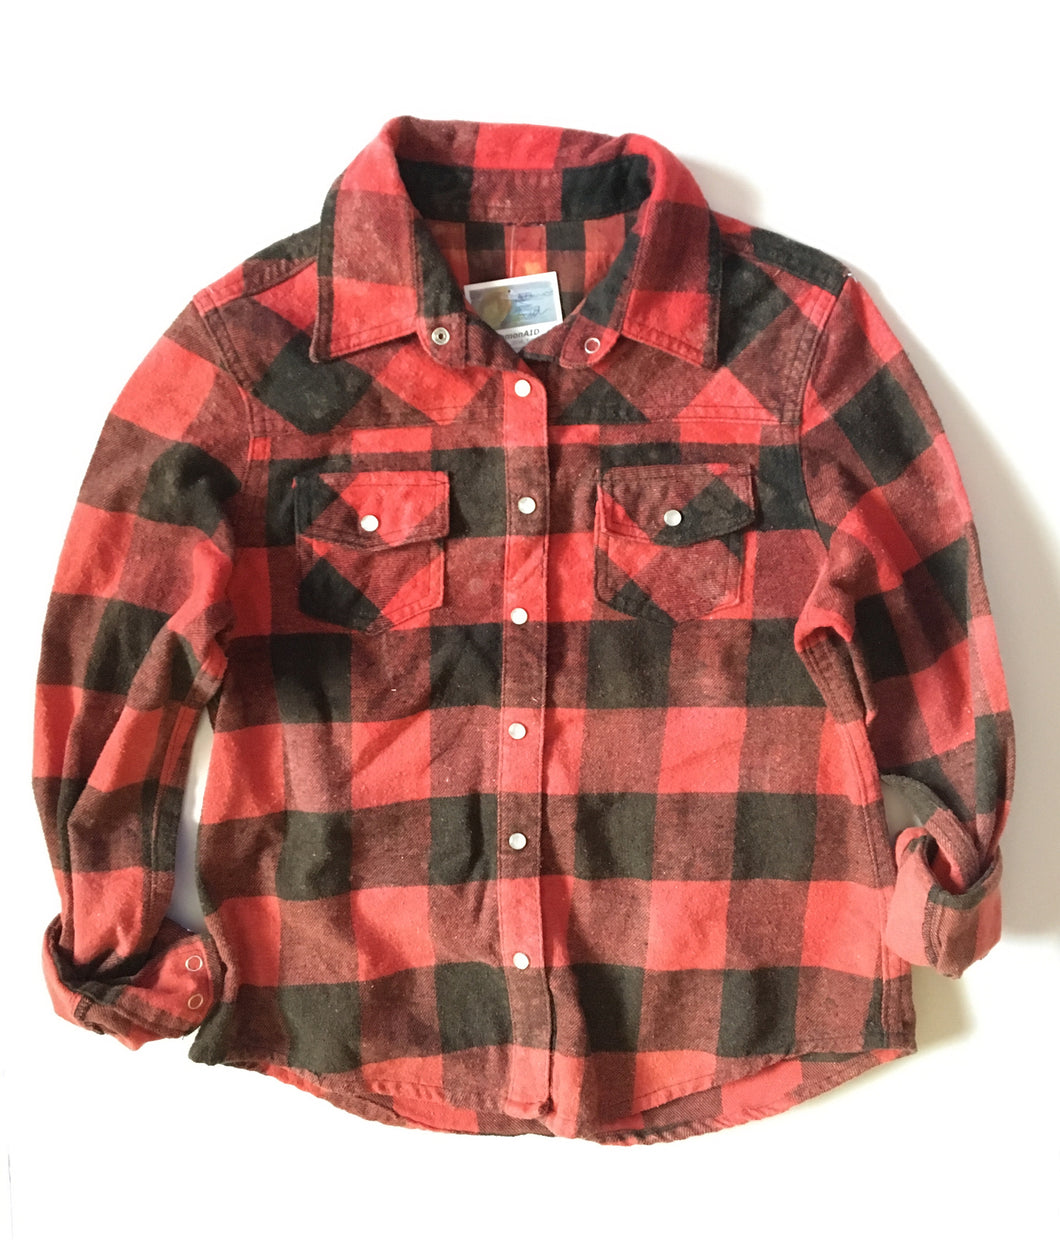 Distressed Flannel - Youth 8